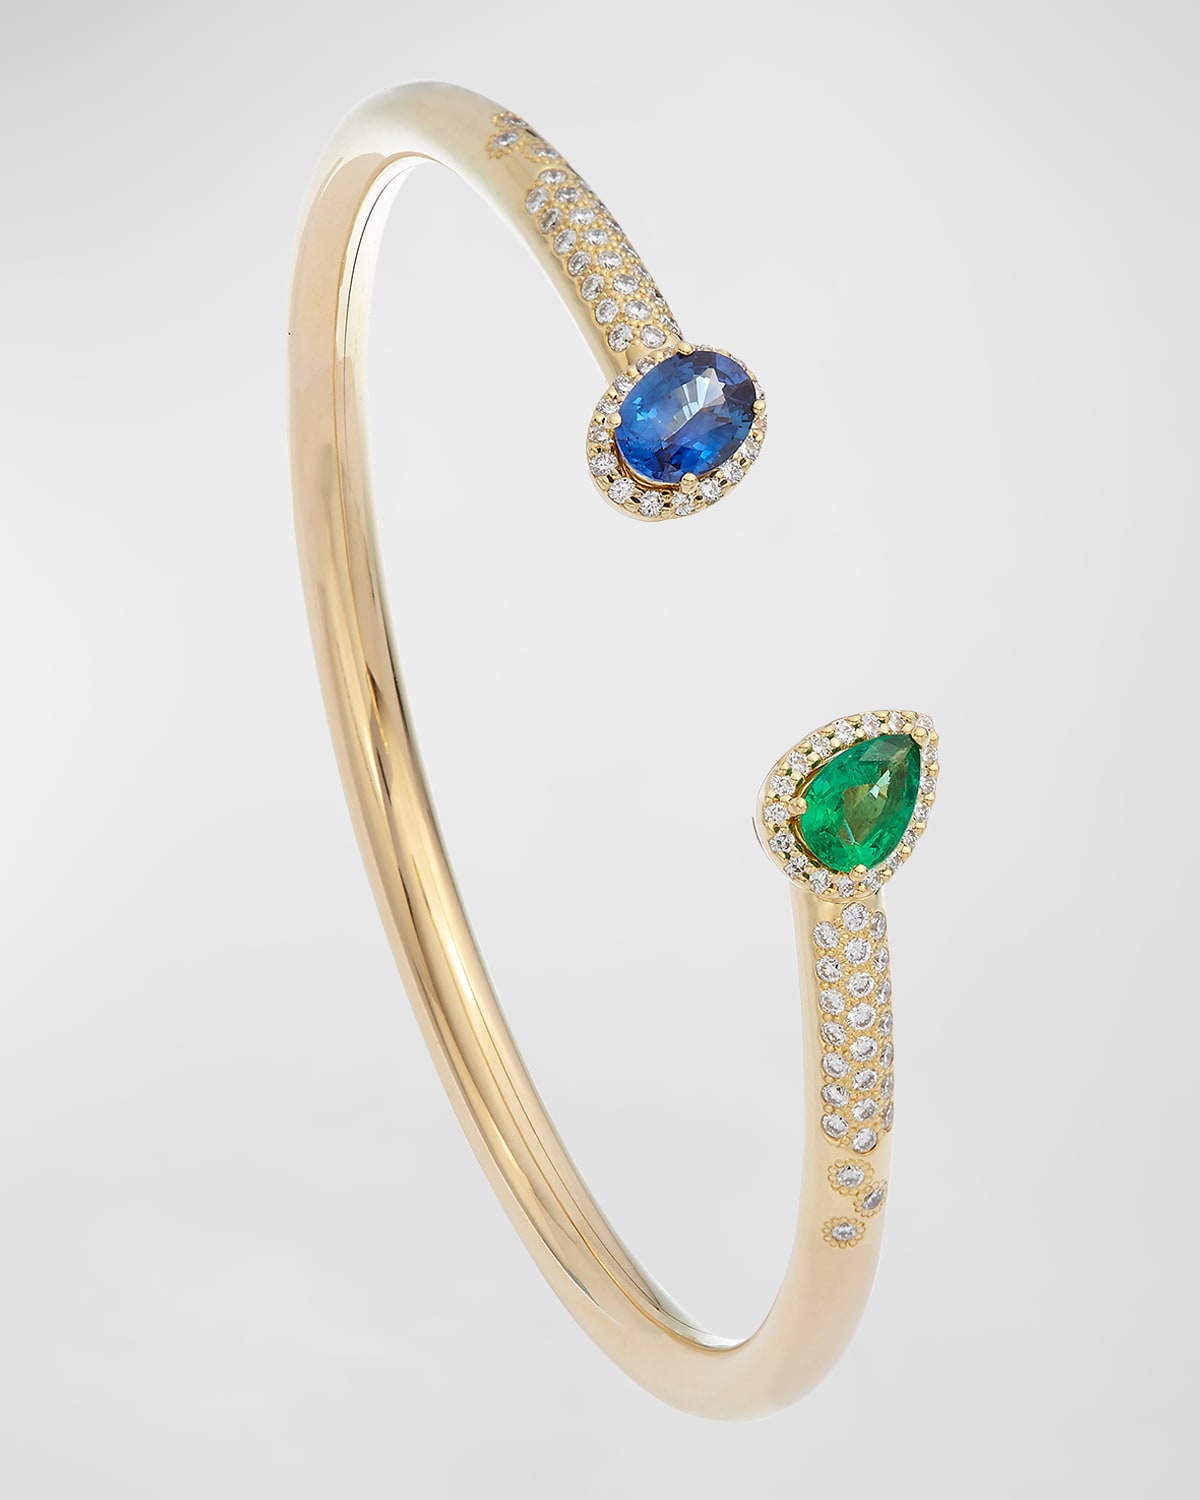 18K Yellow Gold Cuff Bracelet with Sapphires and Diamonds